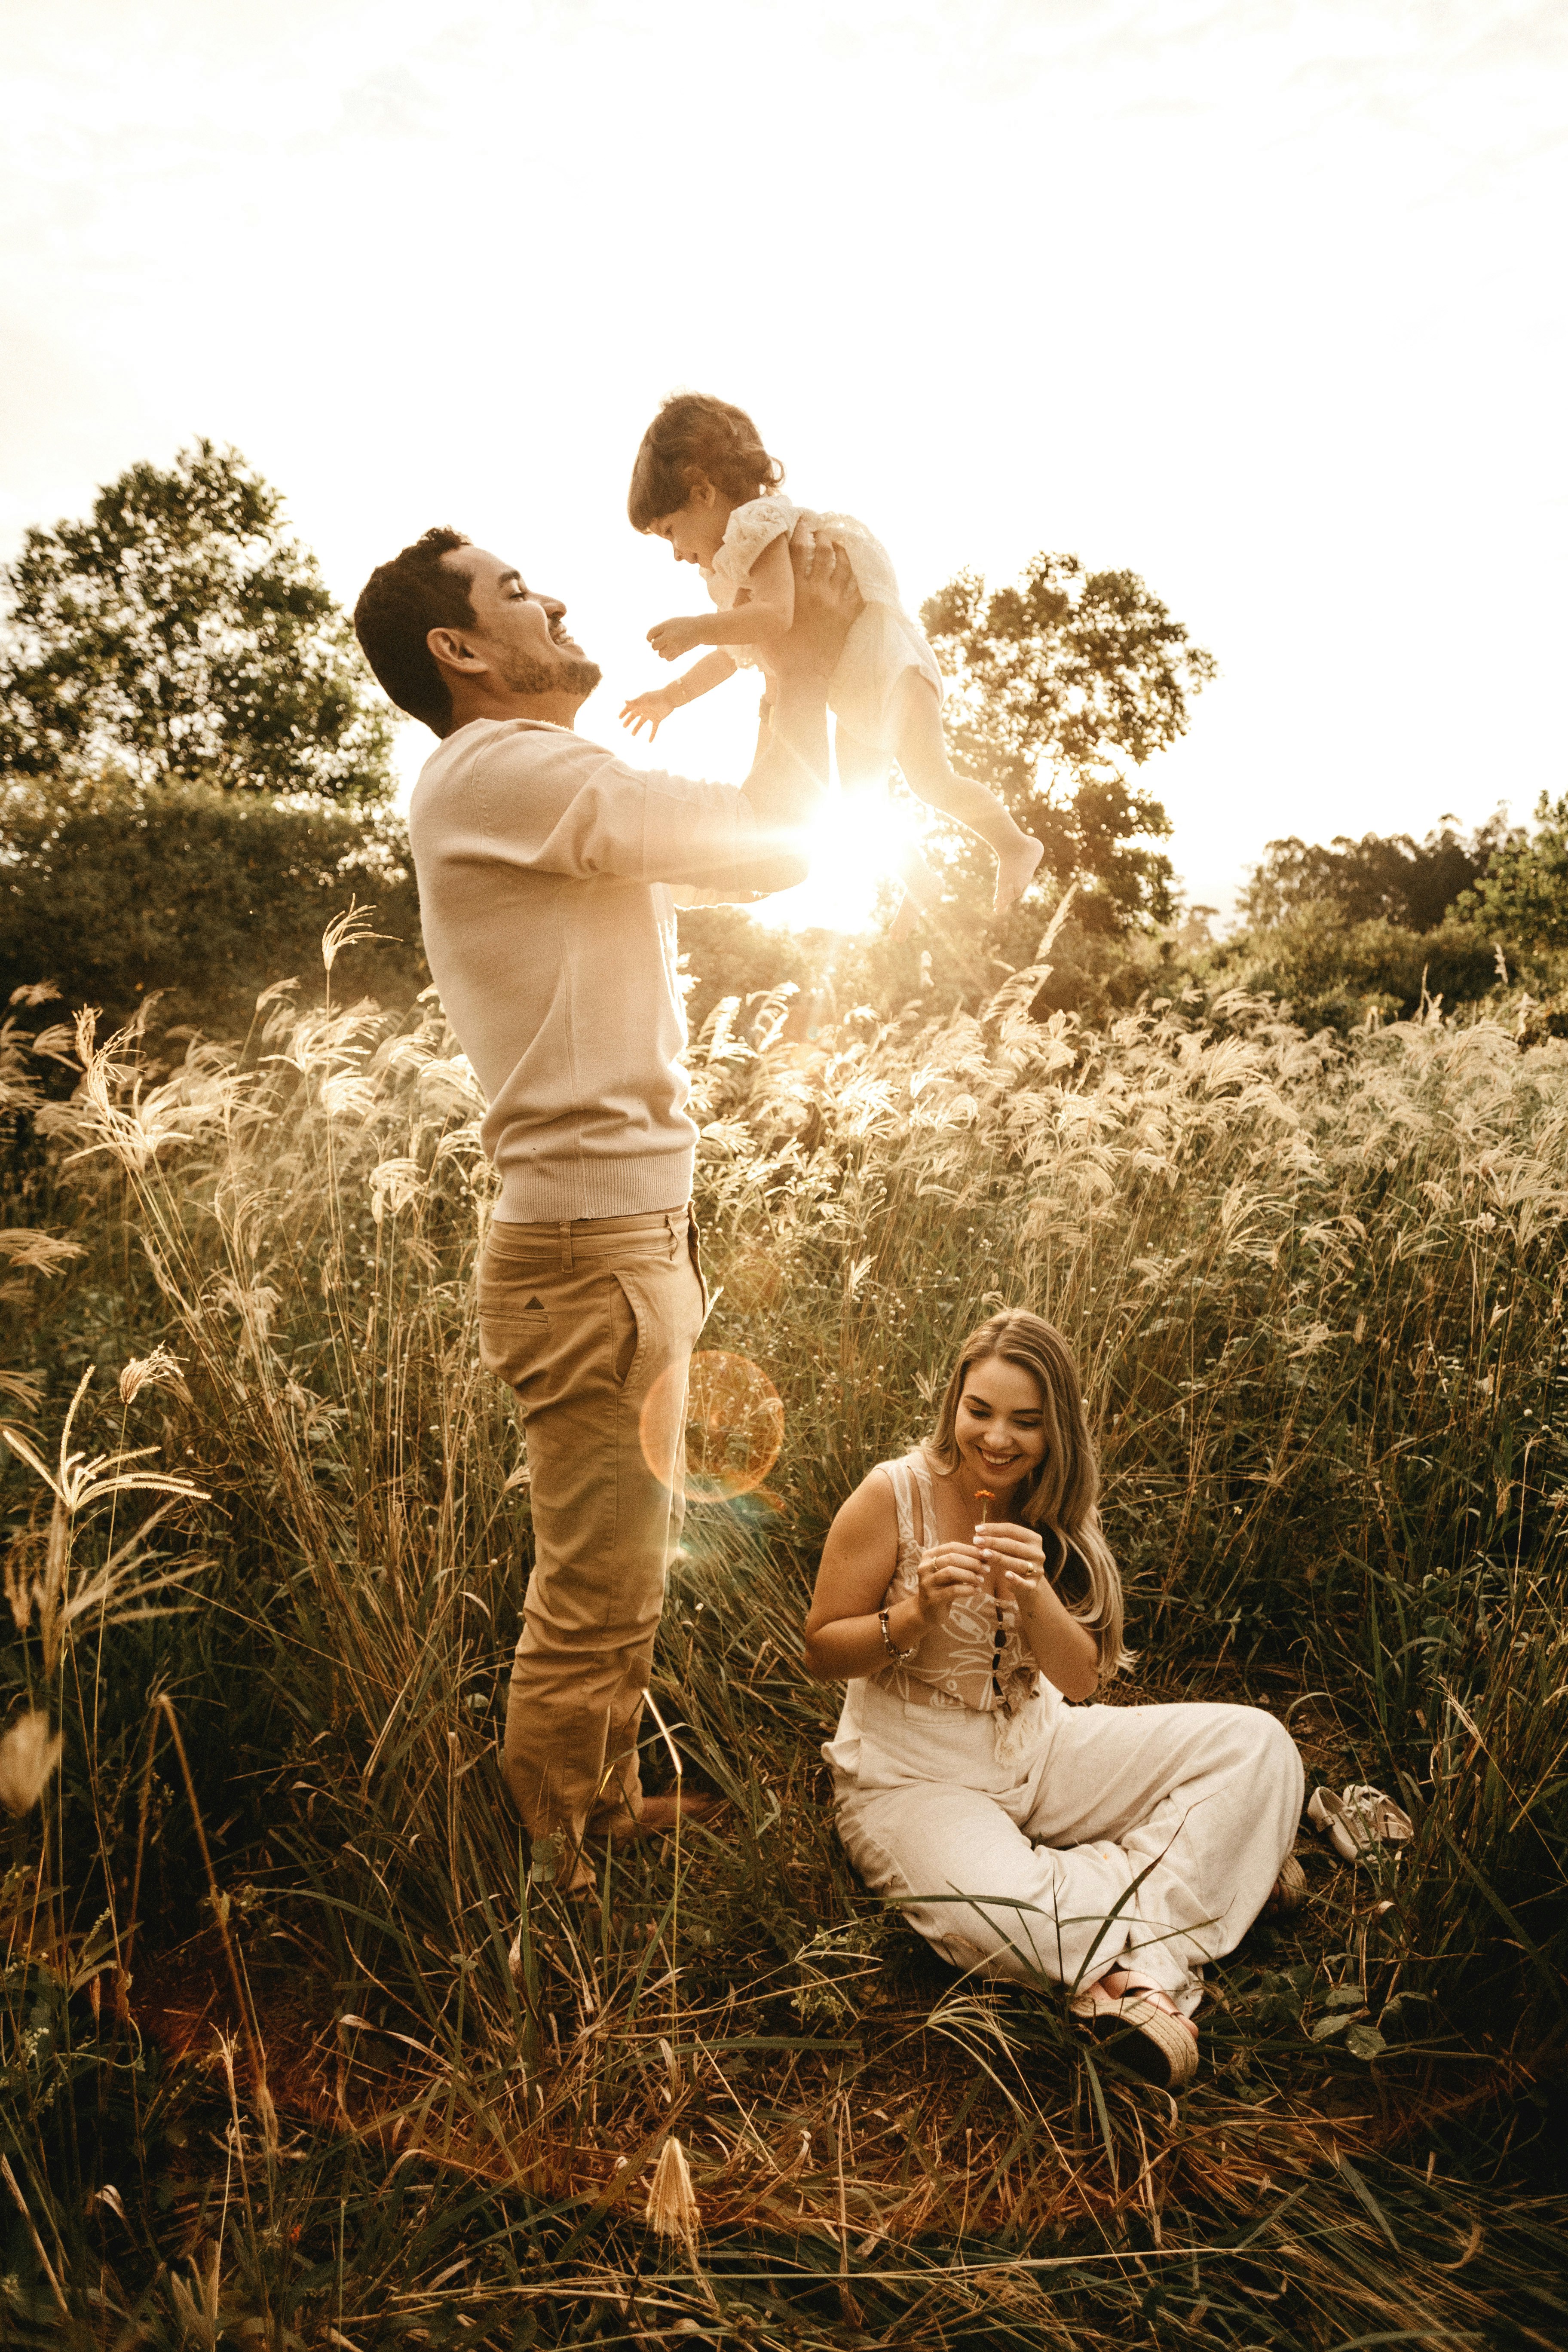 Family enjoying a sunset field photoshoot with father lifting child high and mother smiling on the ground.